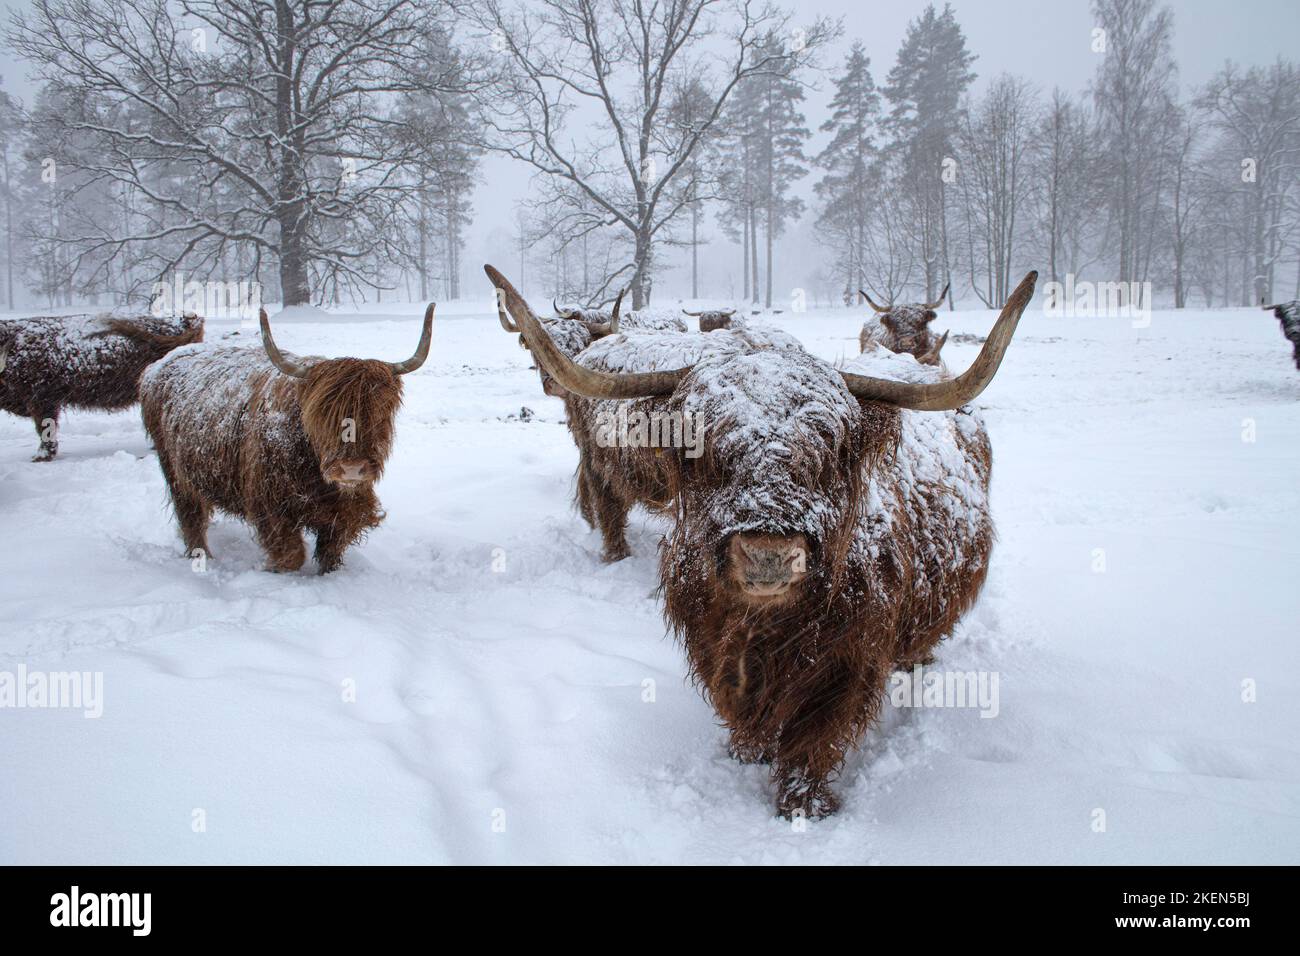 Cow in winter. Cow in snowfall. Scottish highland cattle in winter. Stock Photo